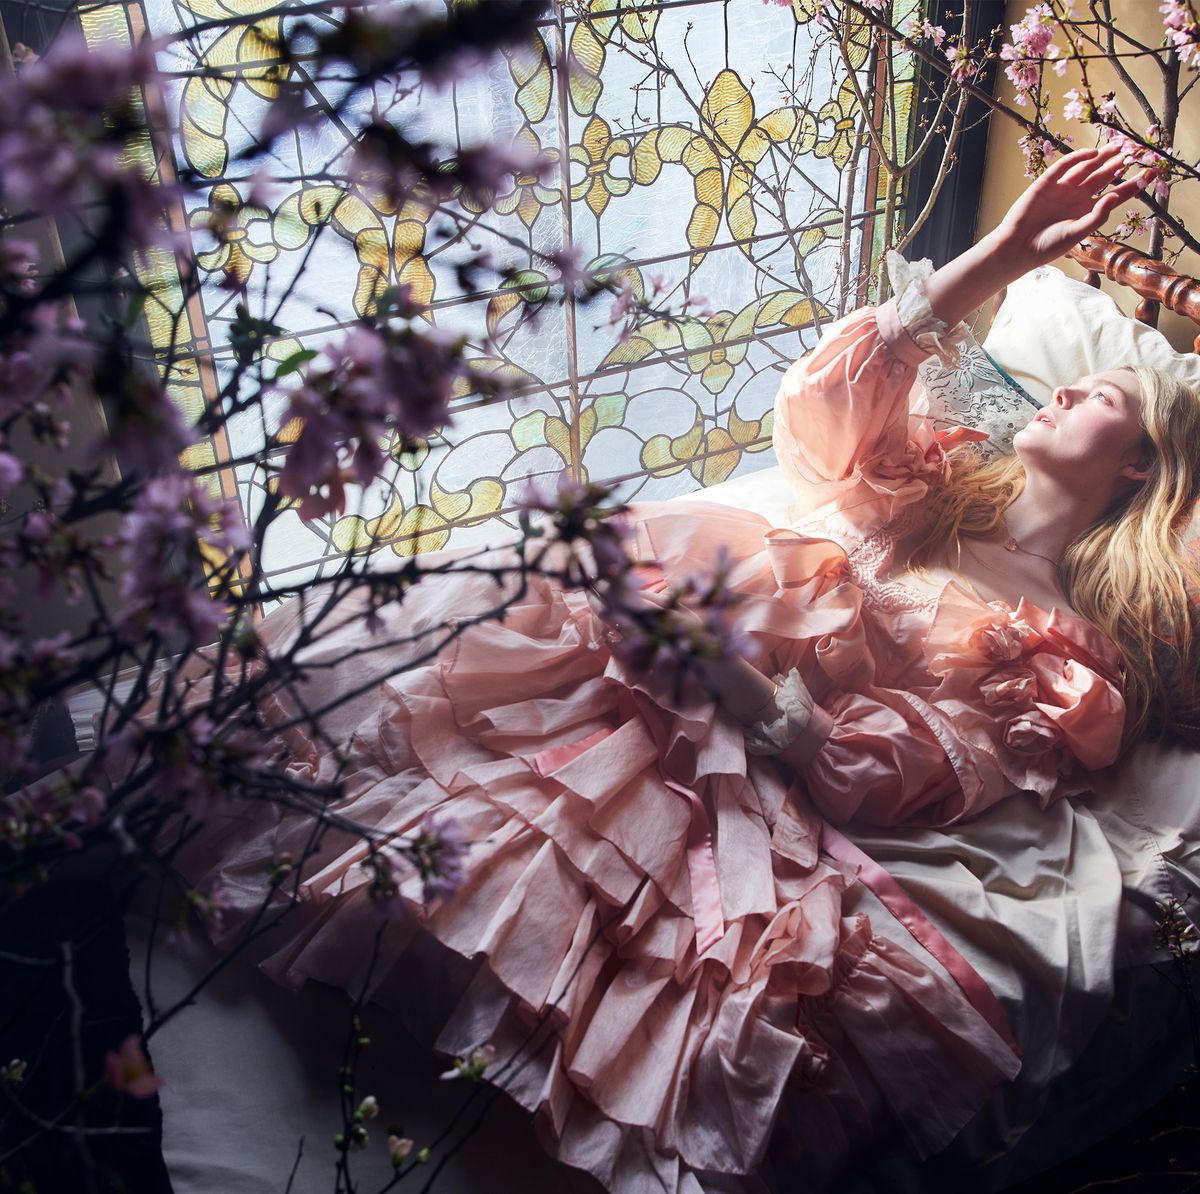 Elle Fanning on growing up on set, speaking her mind and believing